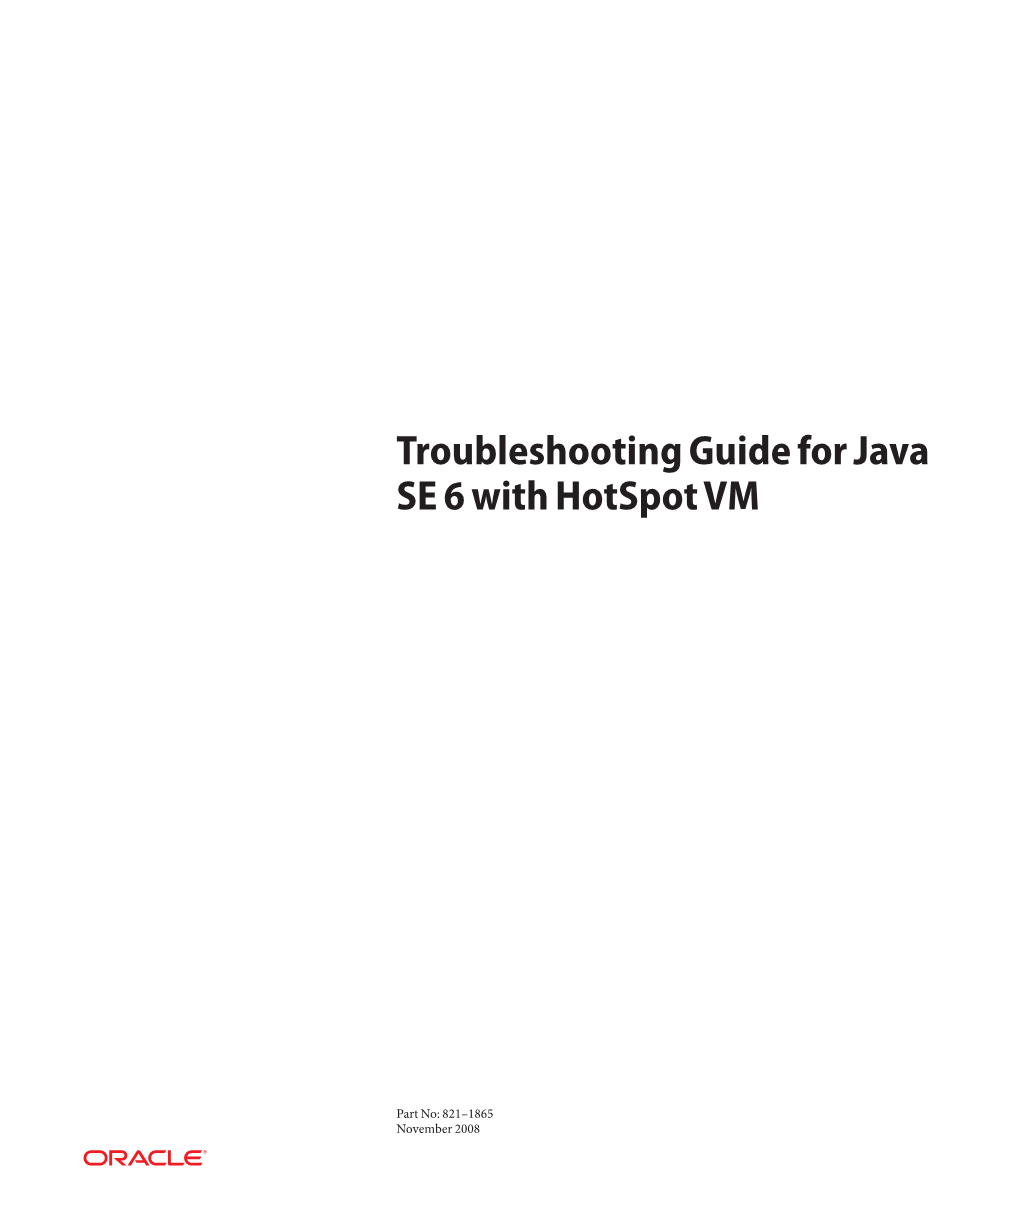 Troubleshooting Guide for Java SE 6 with Hotspot VM